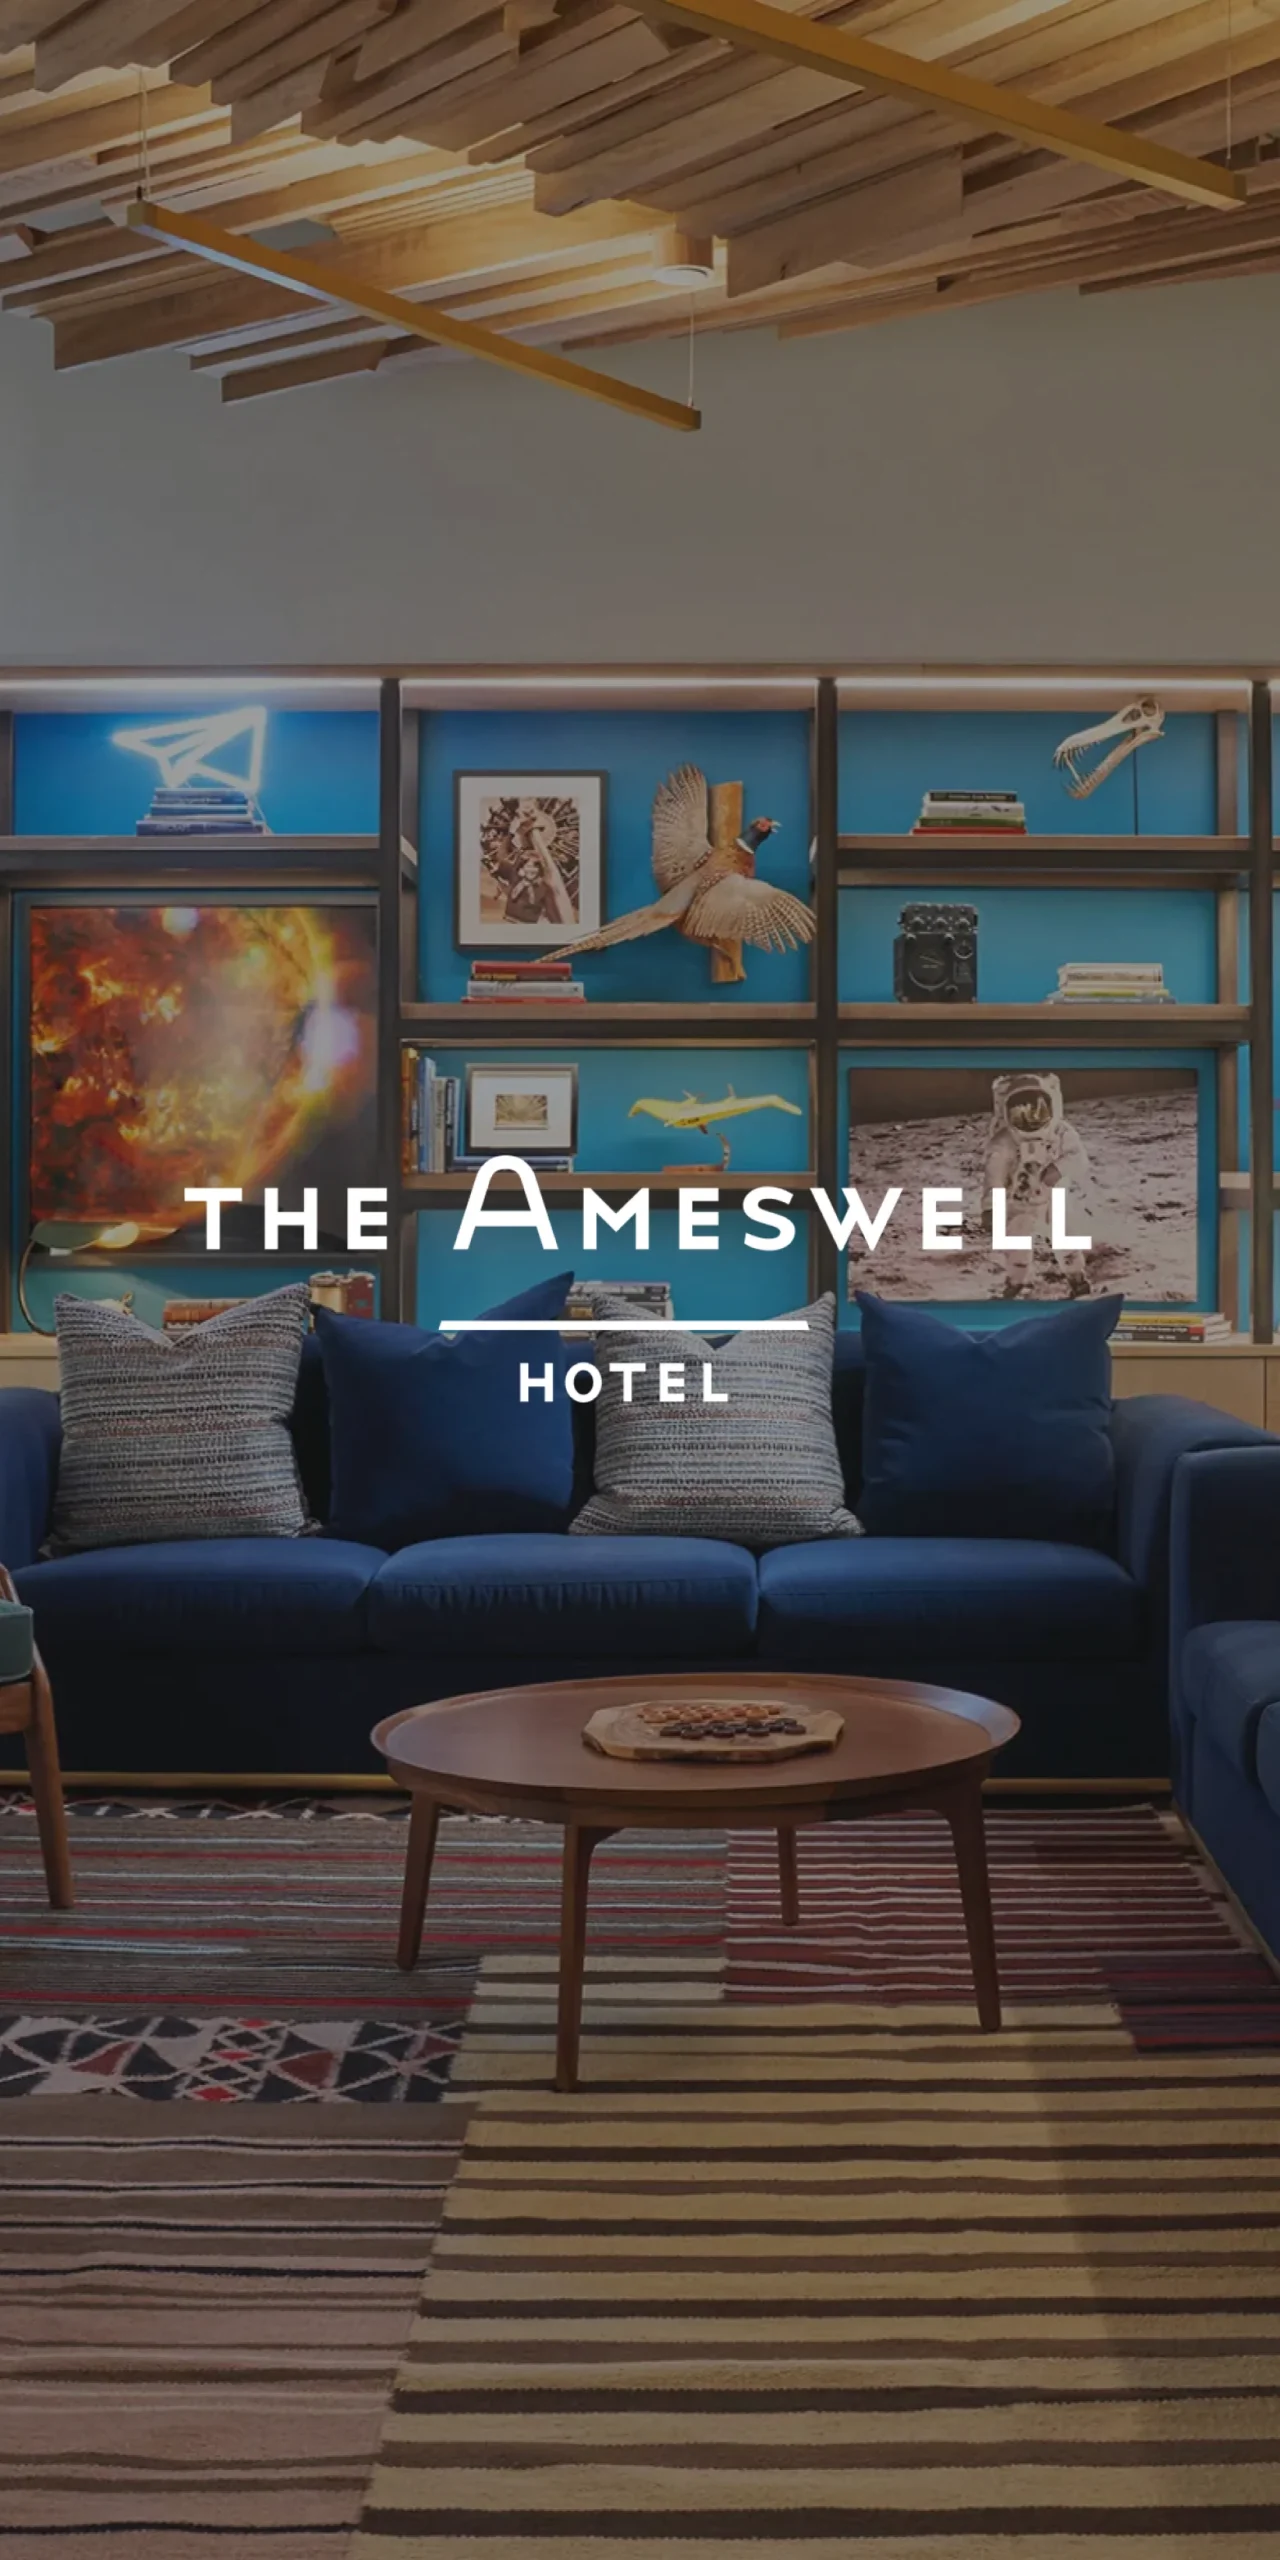 The Ameswell